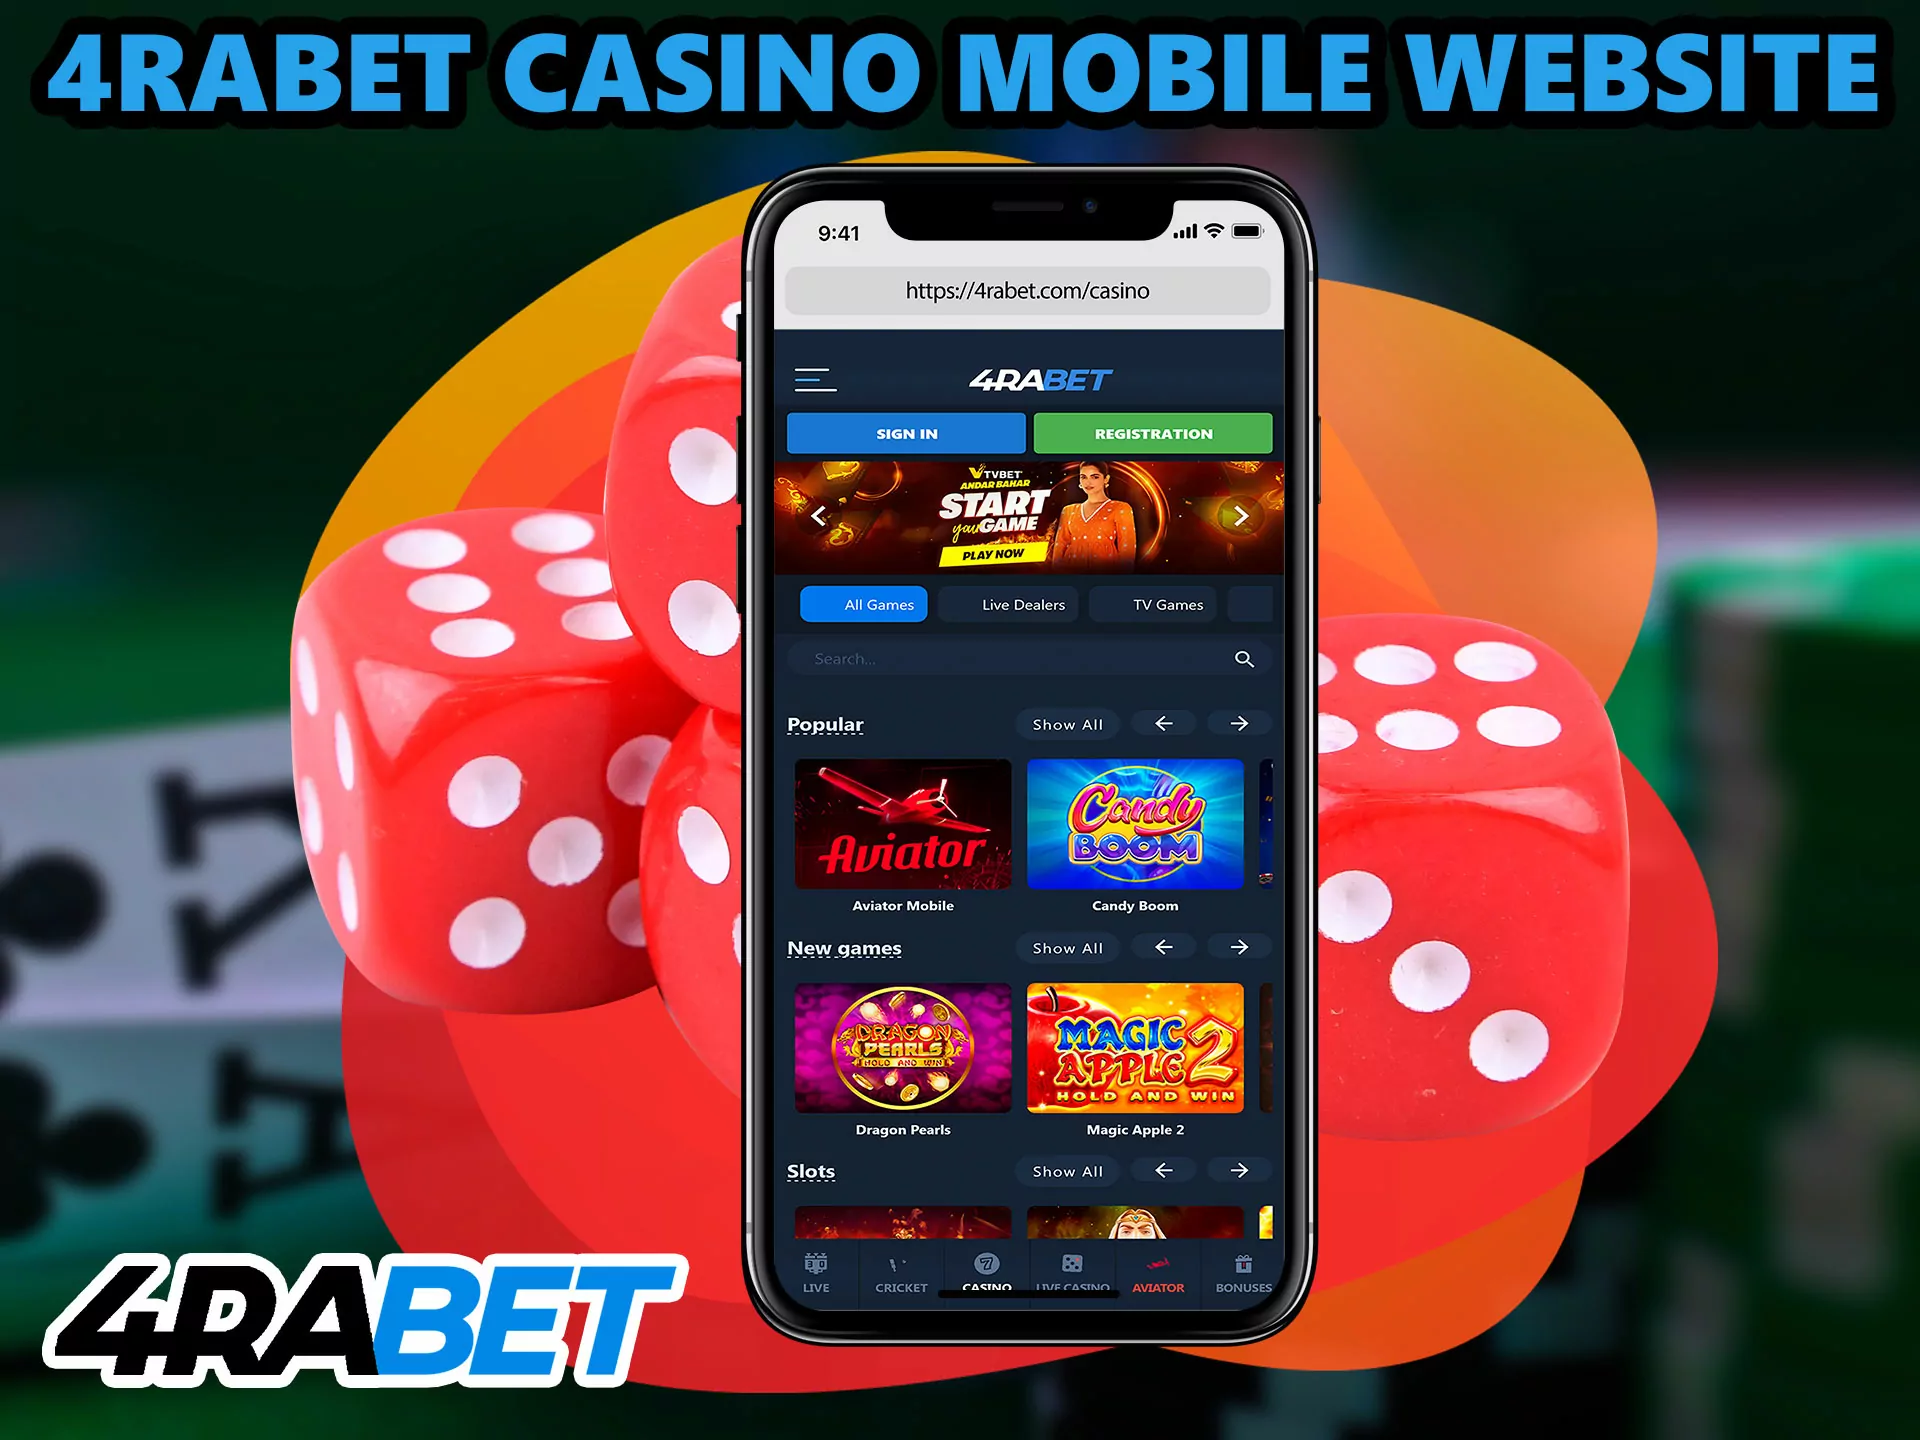 Sometimes users are unable to download the application for some reason, or they do not want to do it themselves, so the casino has thought of a universal version that does not need to be installed.